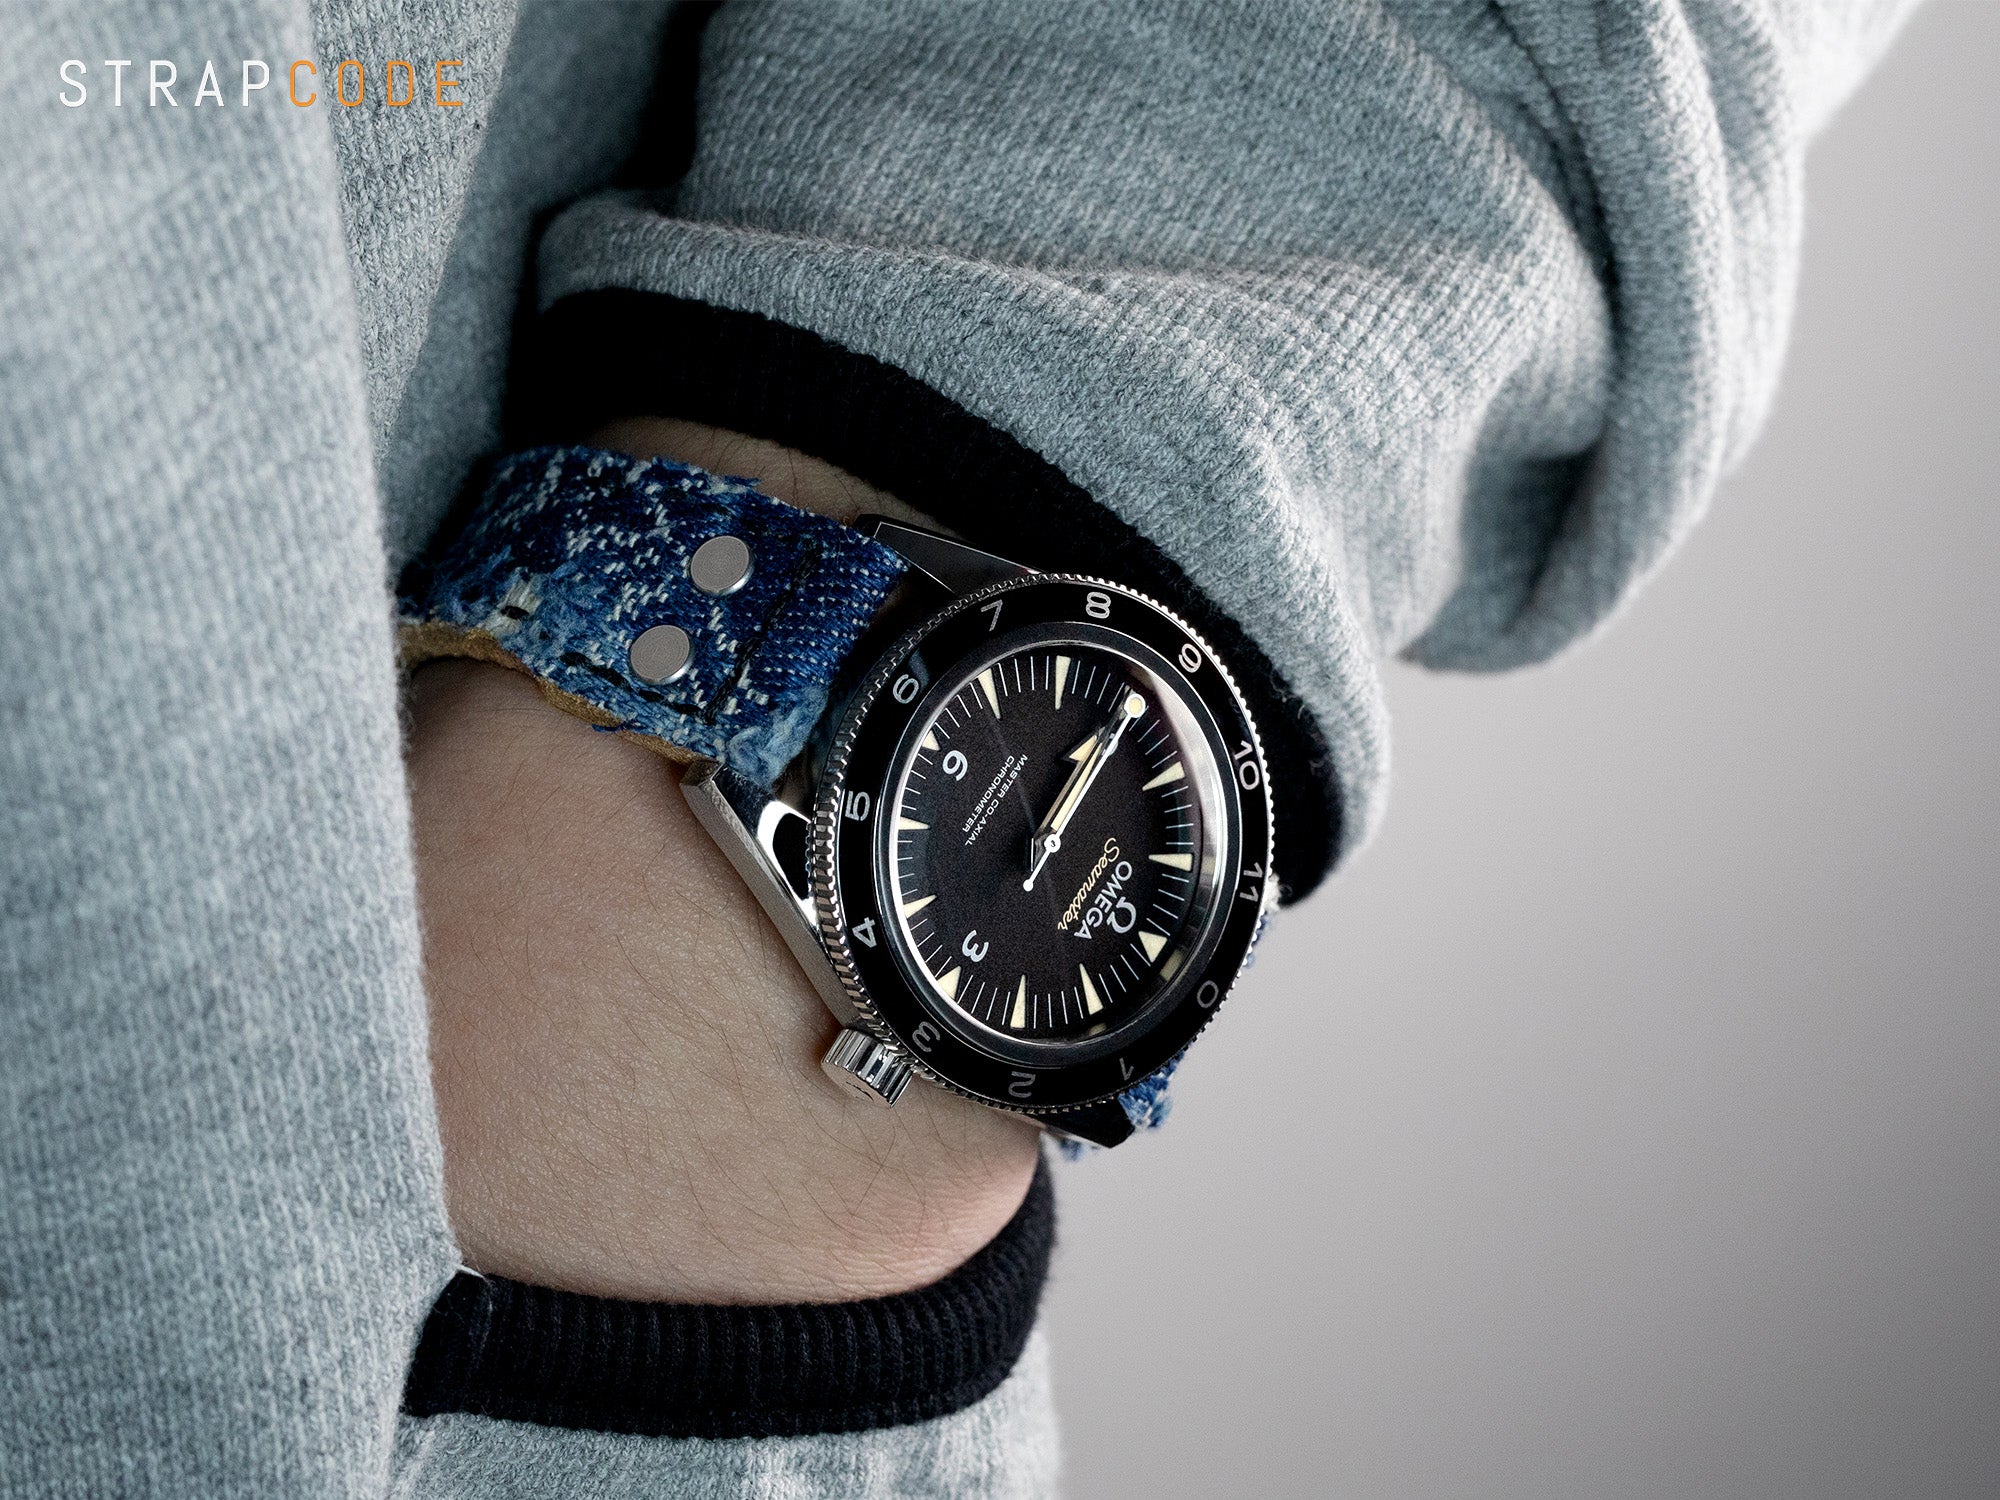 Rock the Omega Seamaster SPECTRE with a Rivet Military Strap by Strapcode